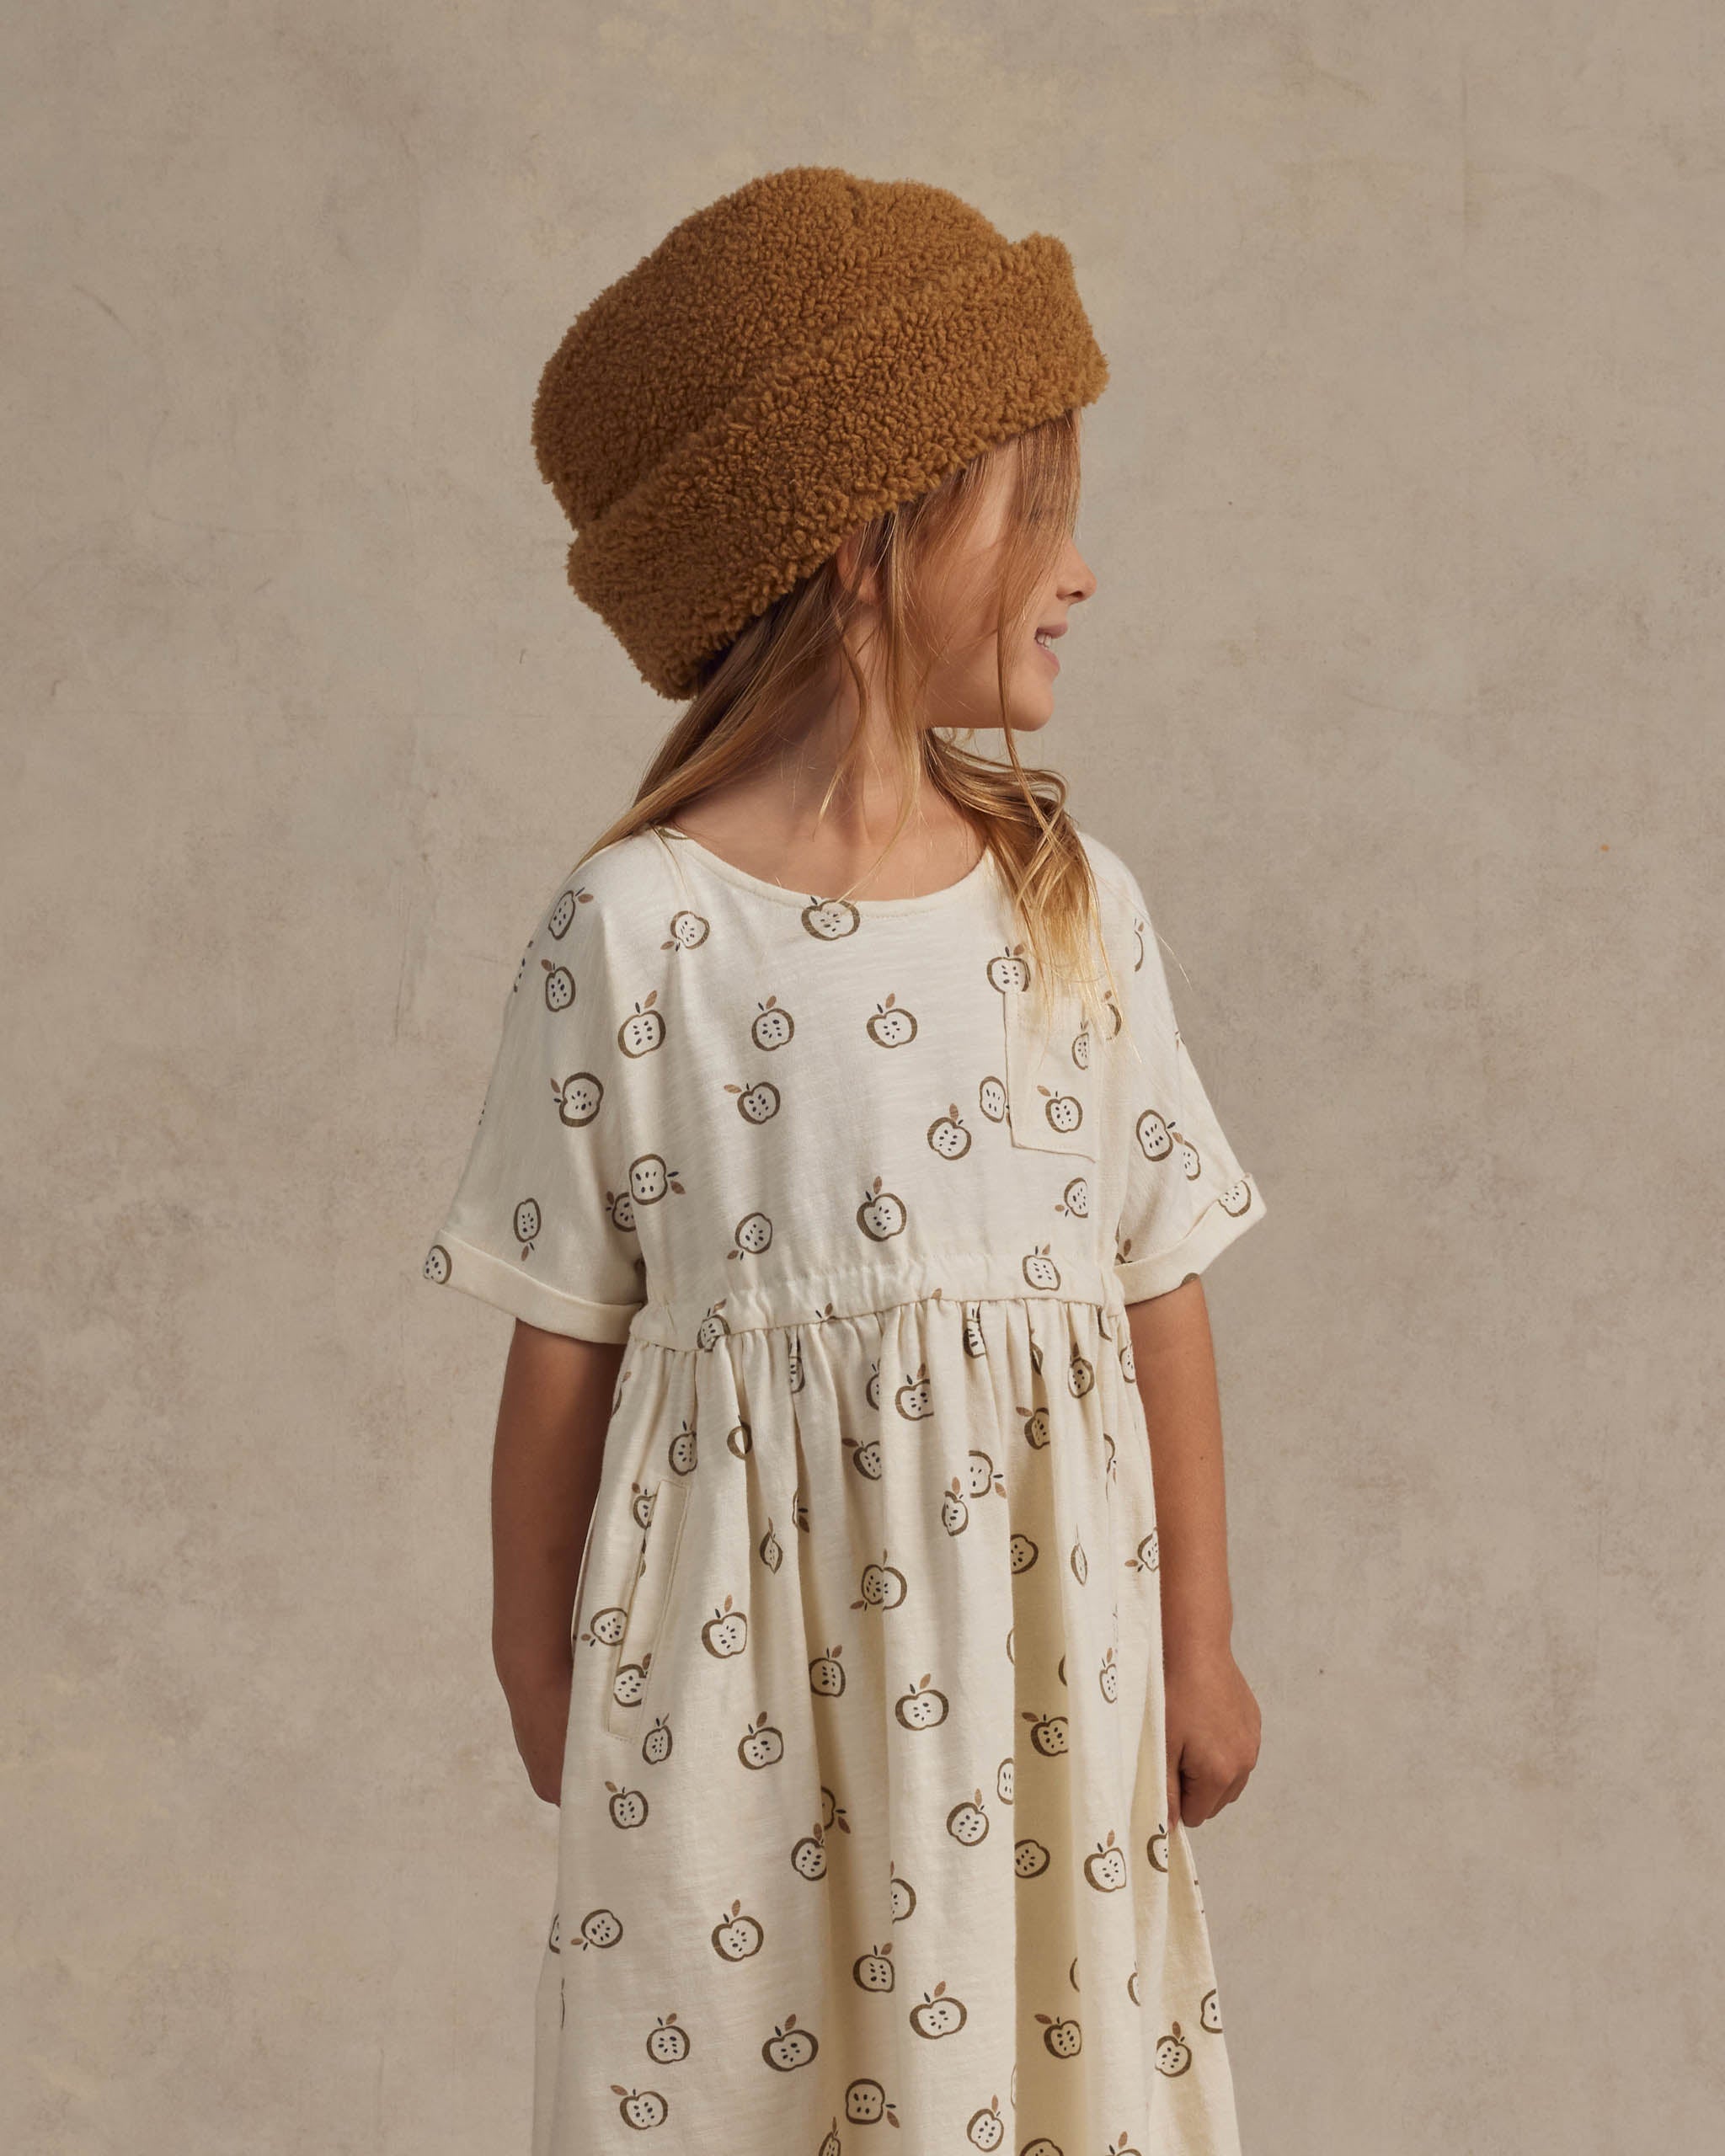 Kat T-Shirt Dress || Apples - Rylee + Cru | Kids Clothes | Trendy Baby Clothes | Modern Infant Outfits |